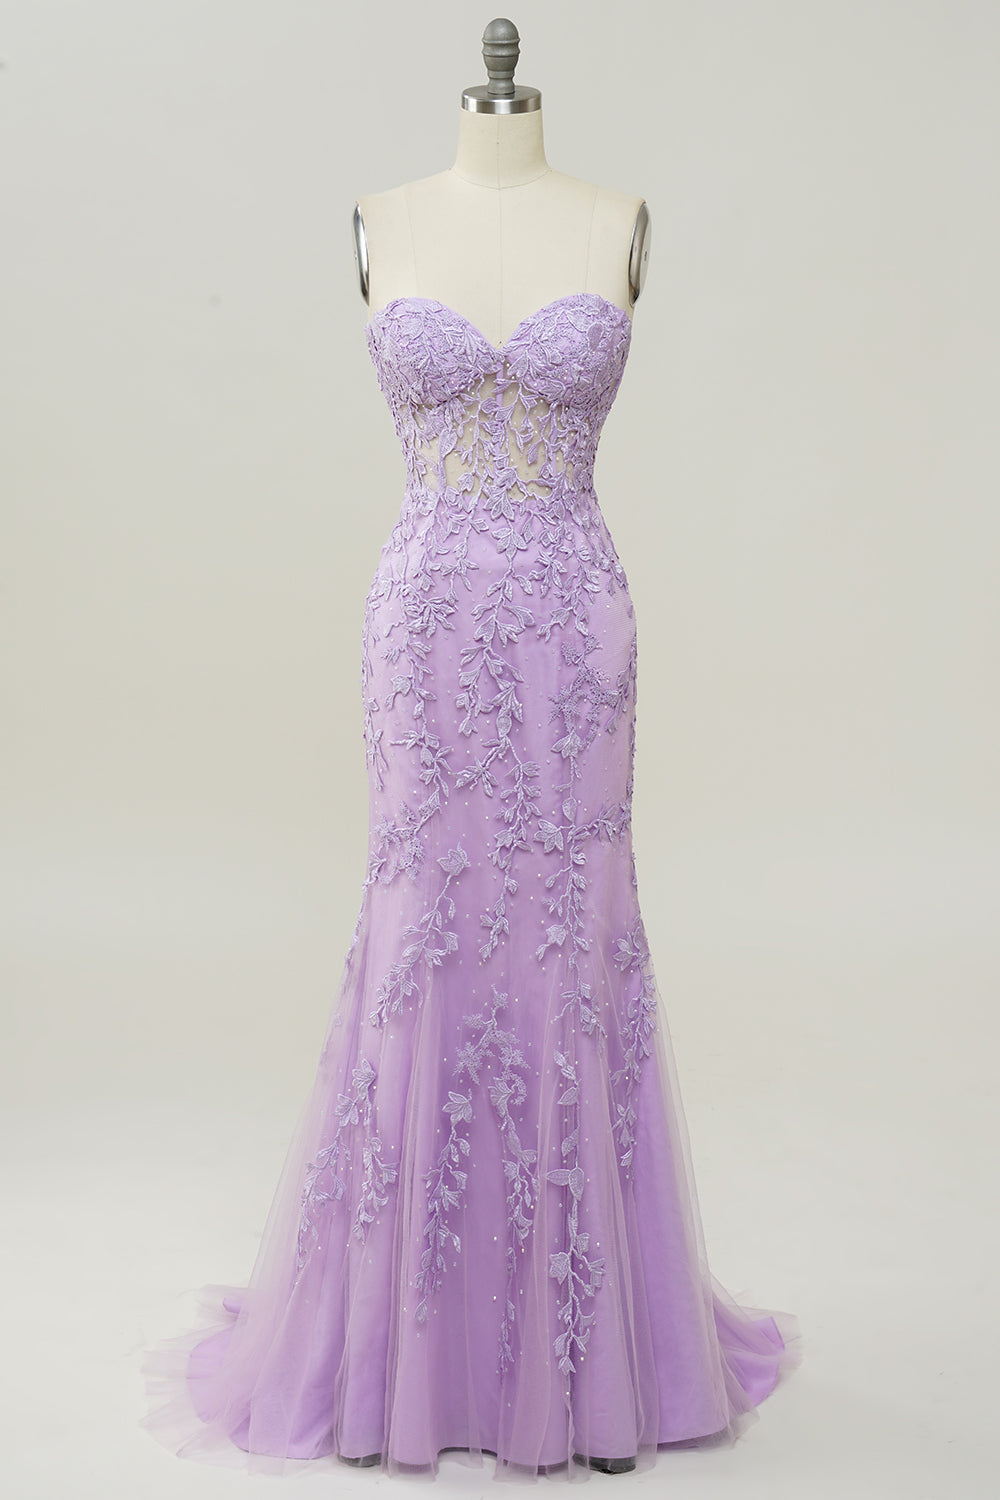 Sweetheart Neck Mermaid Purple Prom Dress With Appliques